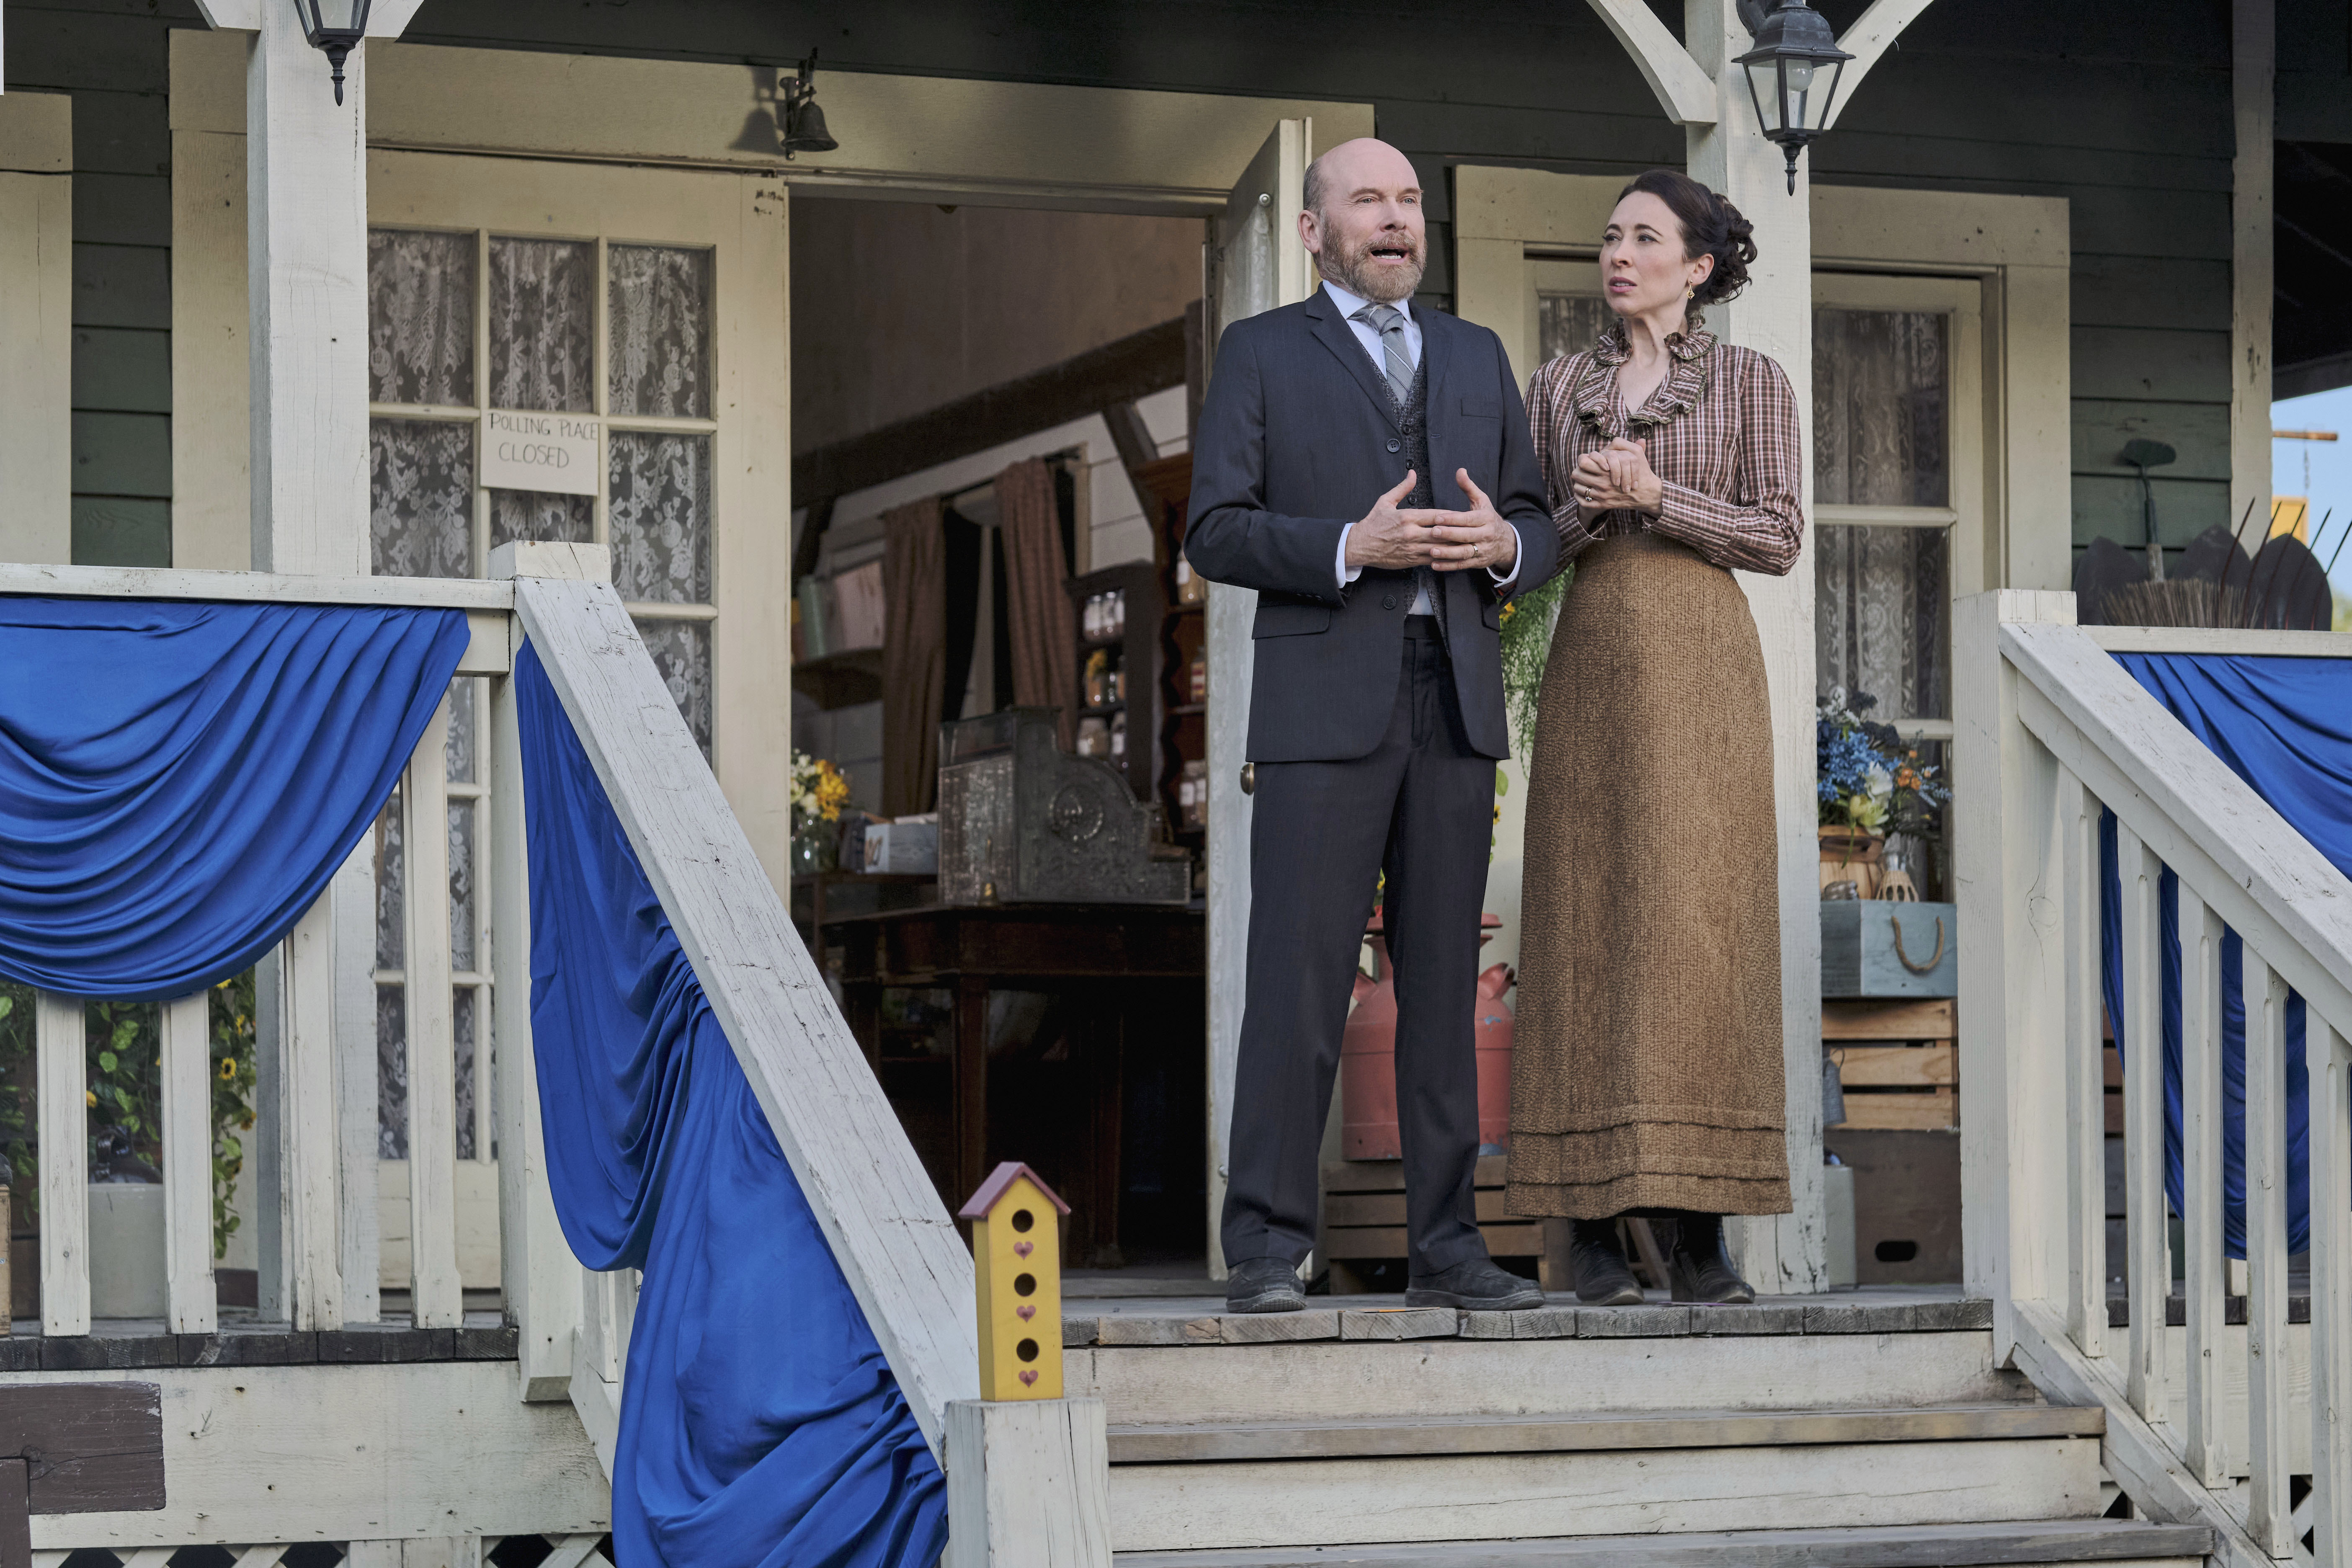 Hrothgar Mathews as Ned and Loretta Walsh as Florence standing on a front porch in 'When Calls the Heart' Season 9